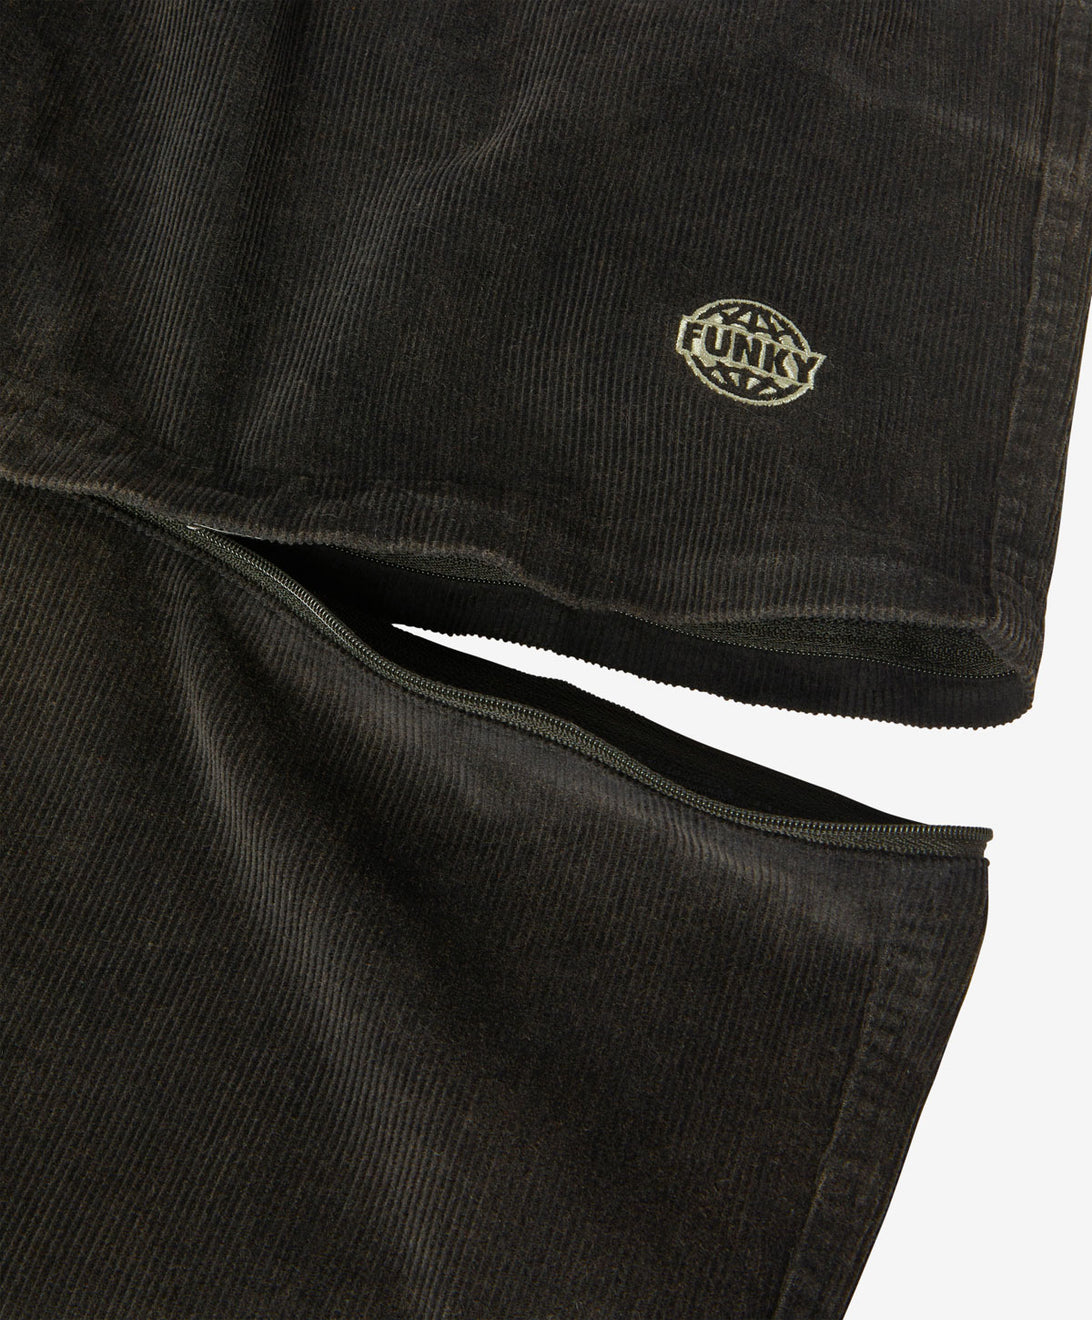 ROUND CORDUROY TROUSERS WASHED BLACK